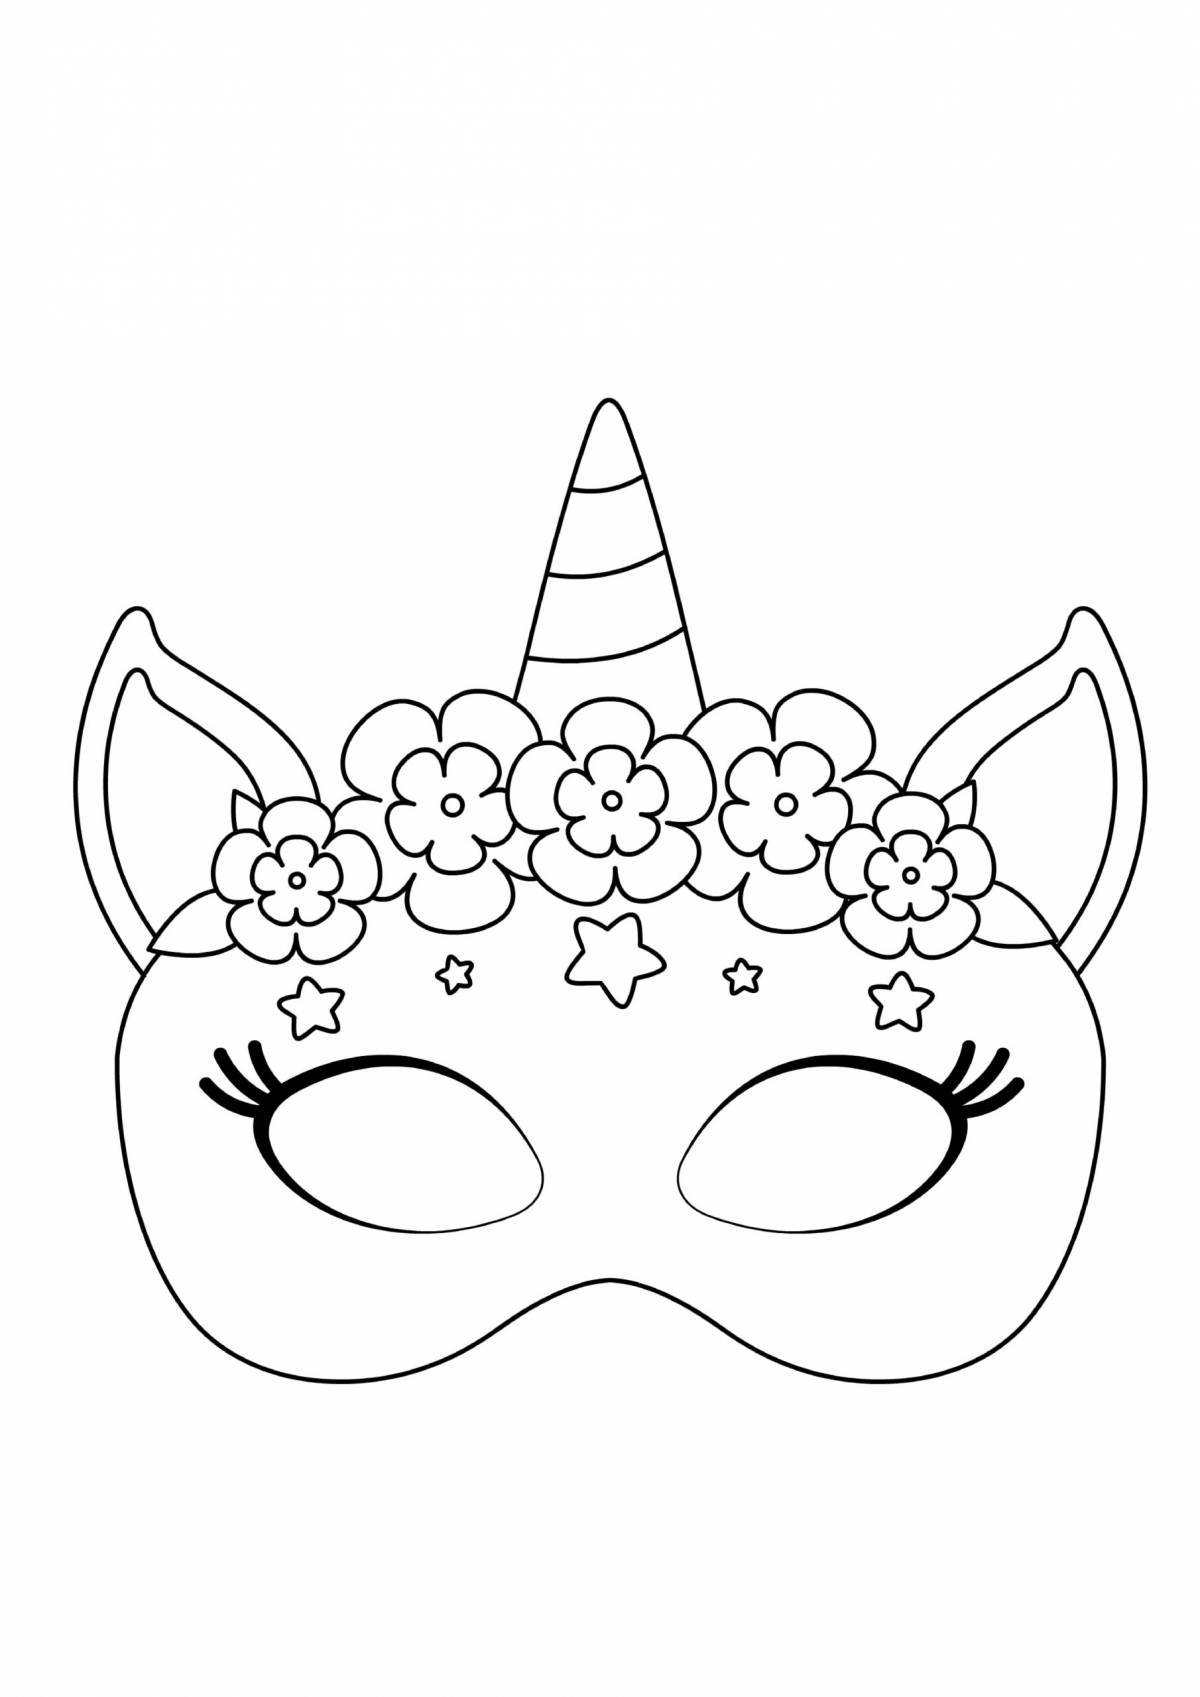 Amazing mask coloring page